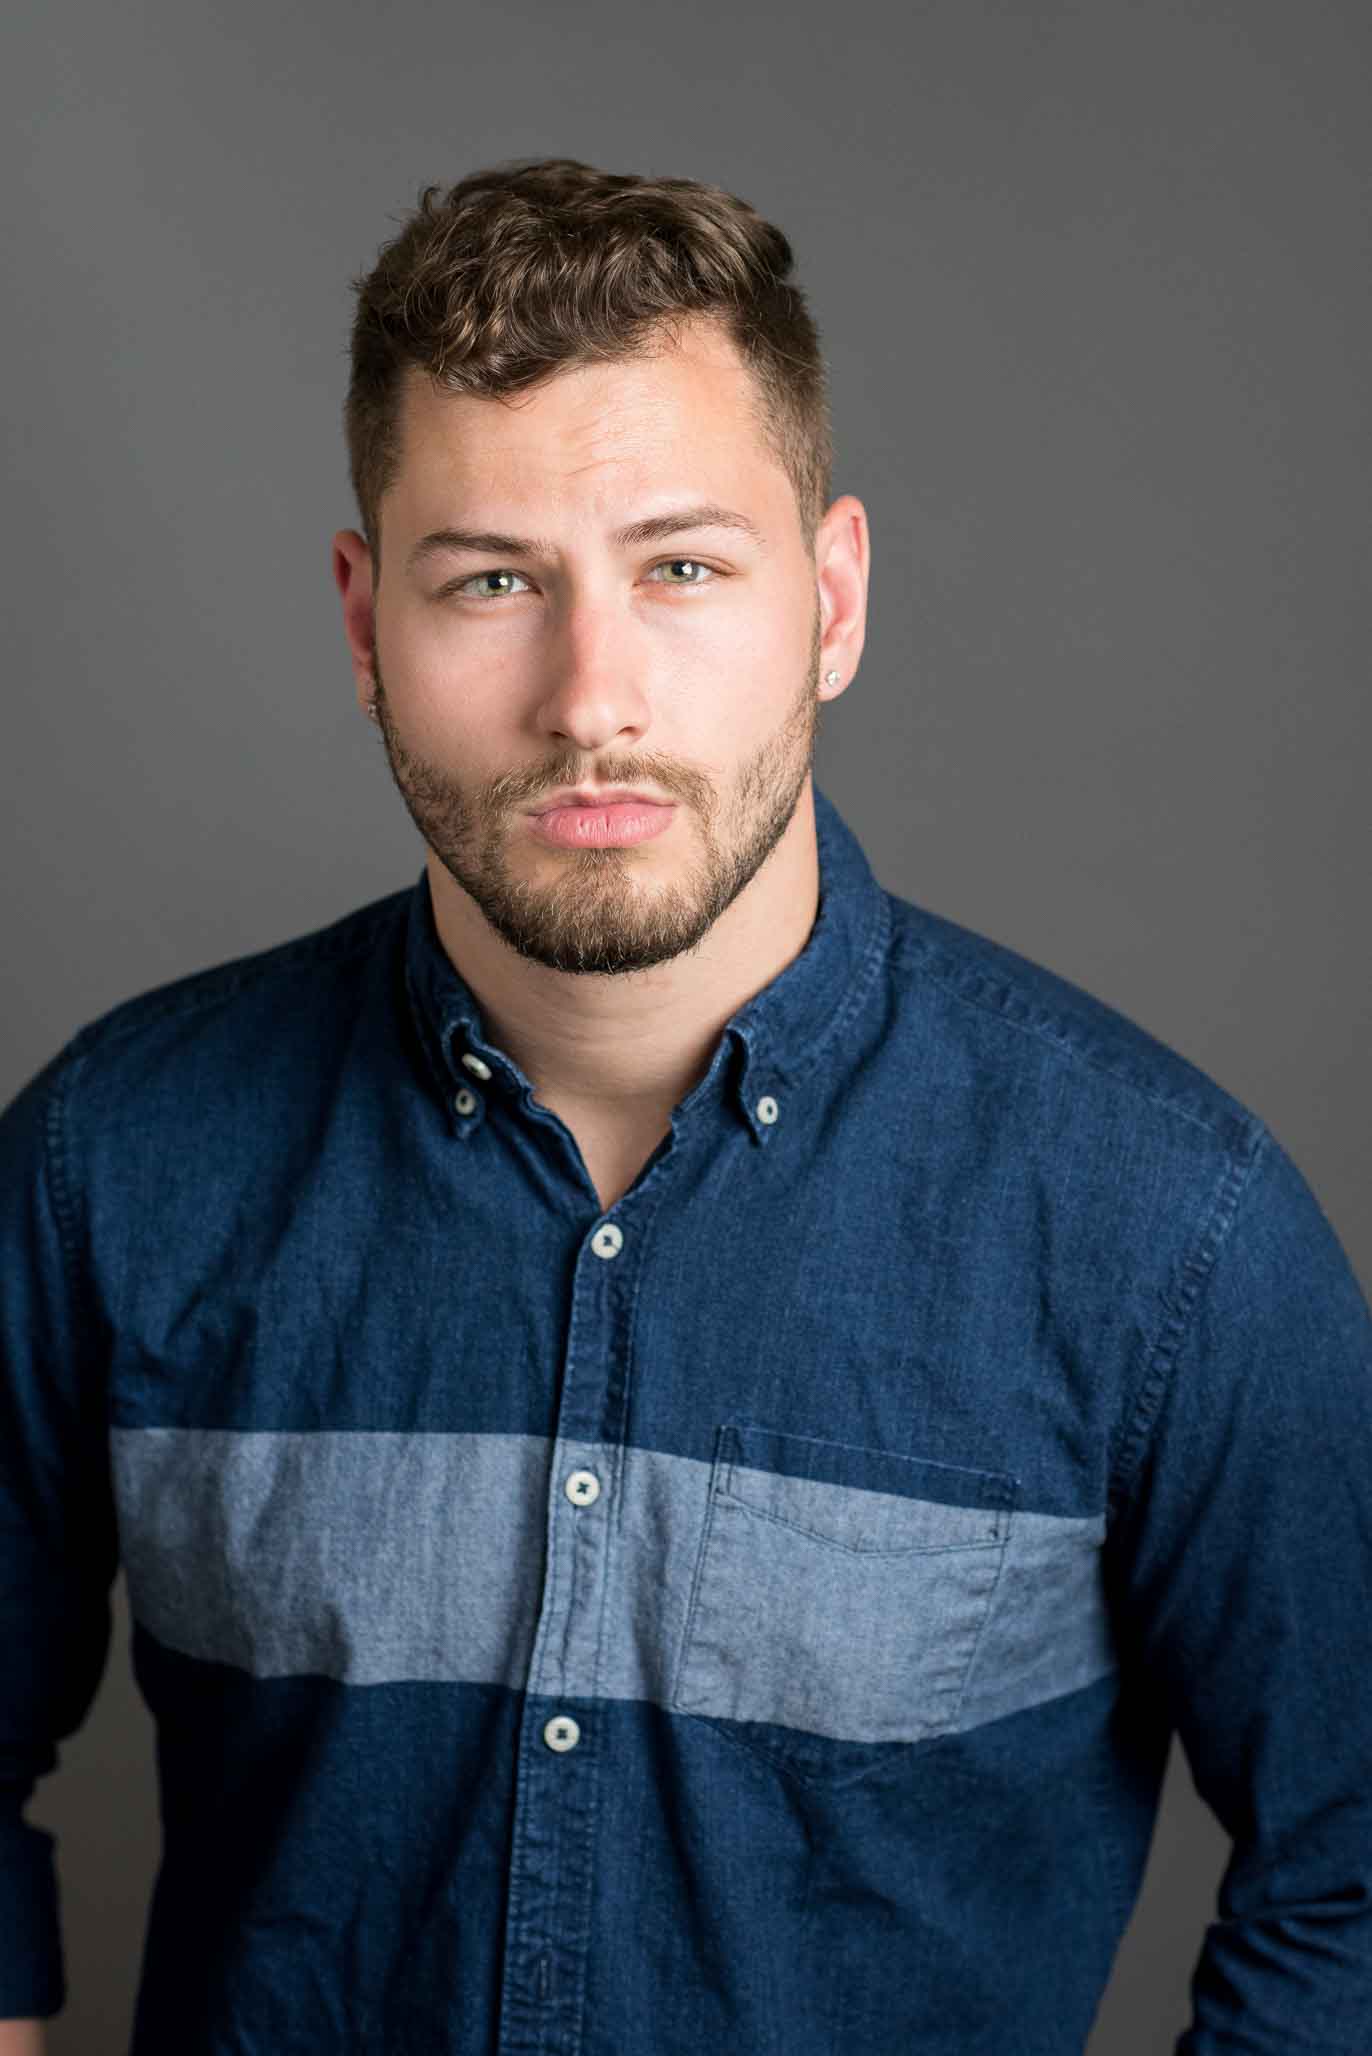 Man wearing blue button down shirt, well groomed beard and hair, posing for headshot.